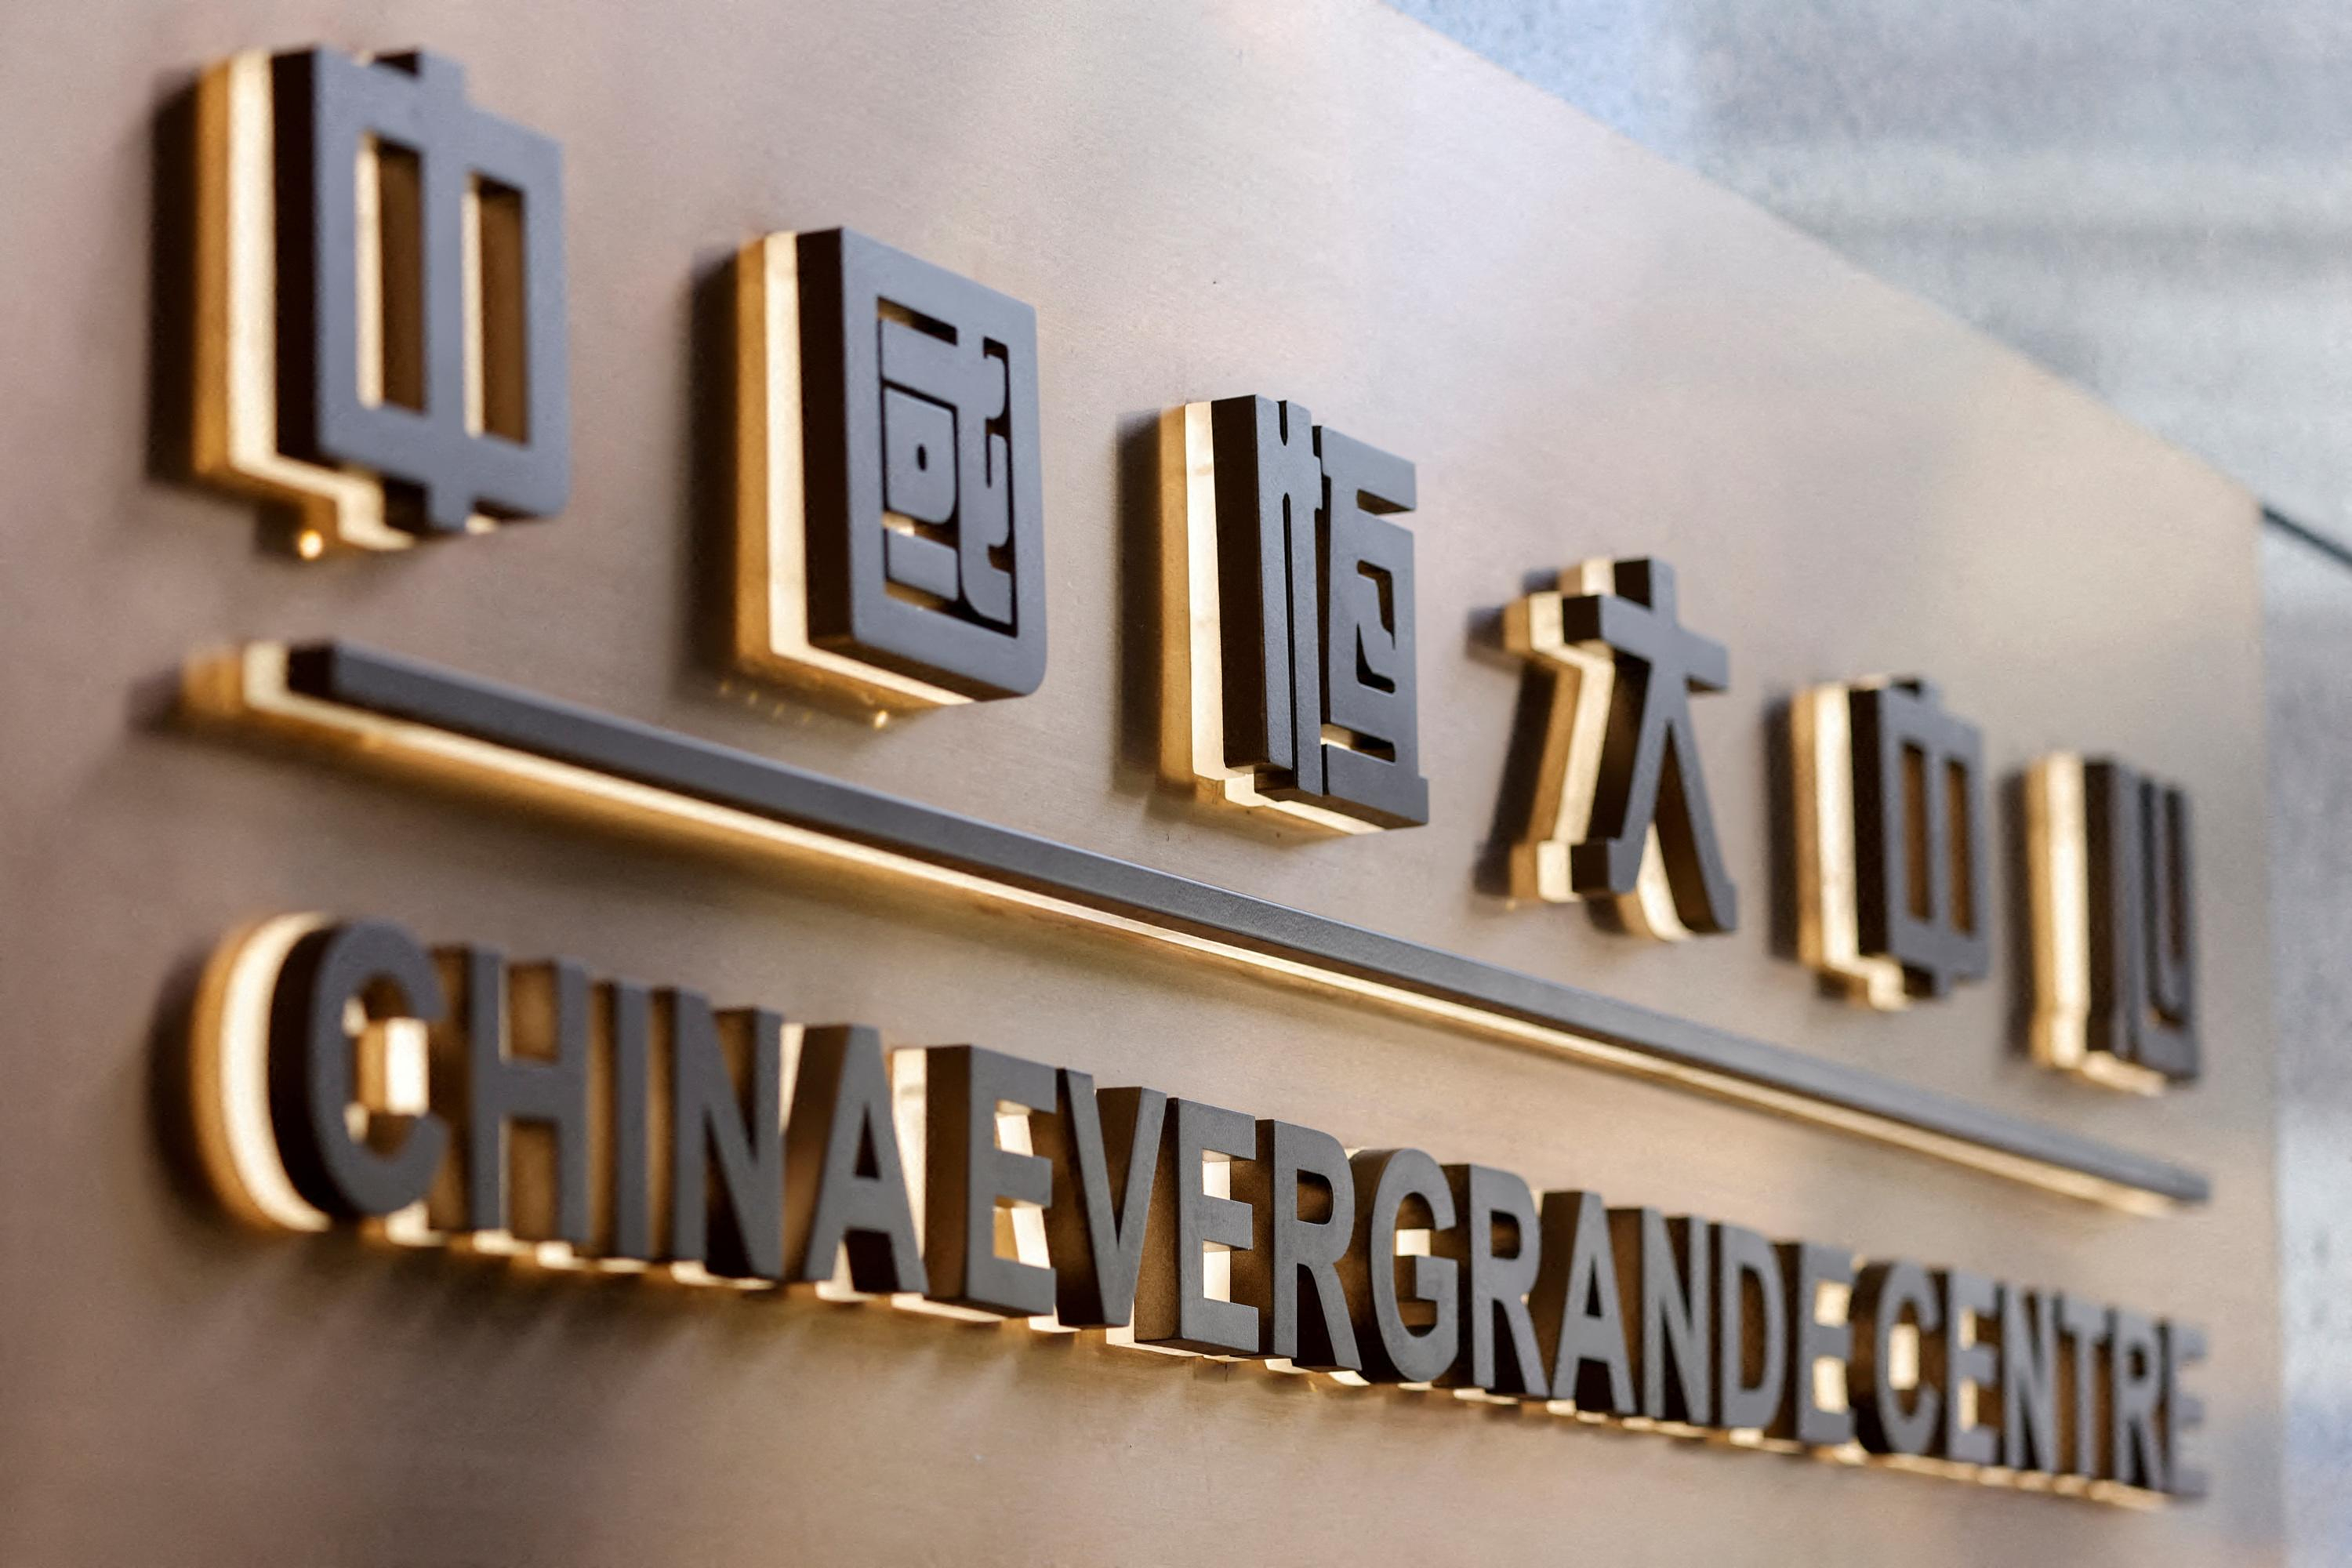 China: Evergrande president soon banned for life from stock markets